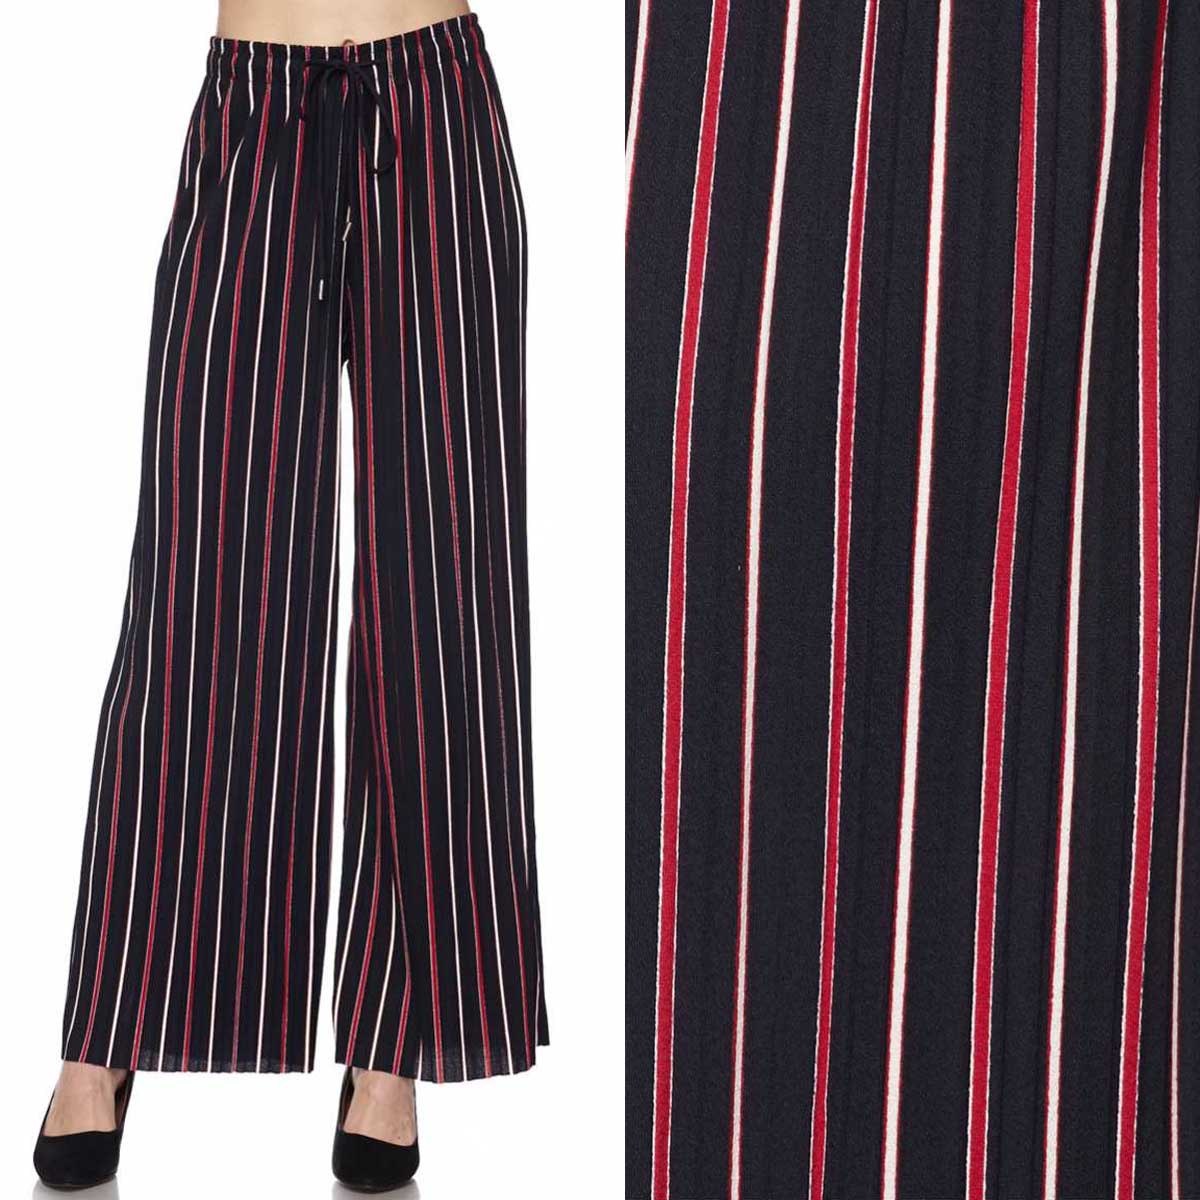 902ANP - Pleated Wide Leg Twill Pants PLUS #12 Striped Navy-Red